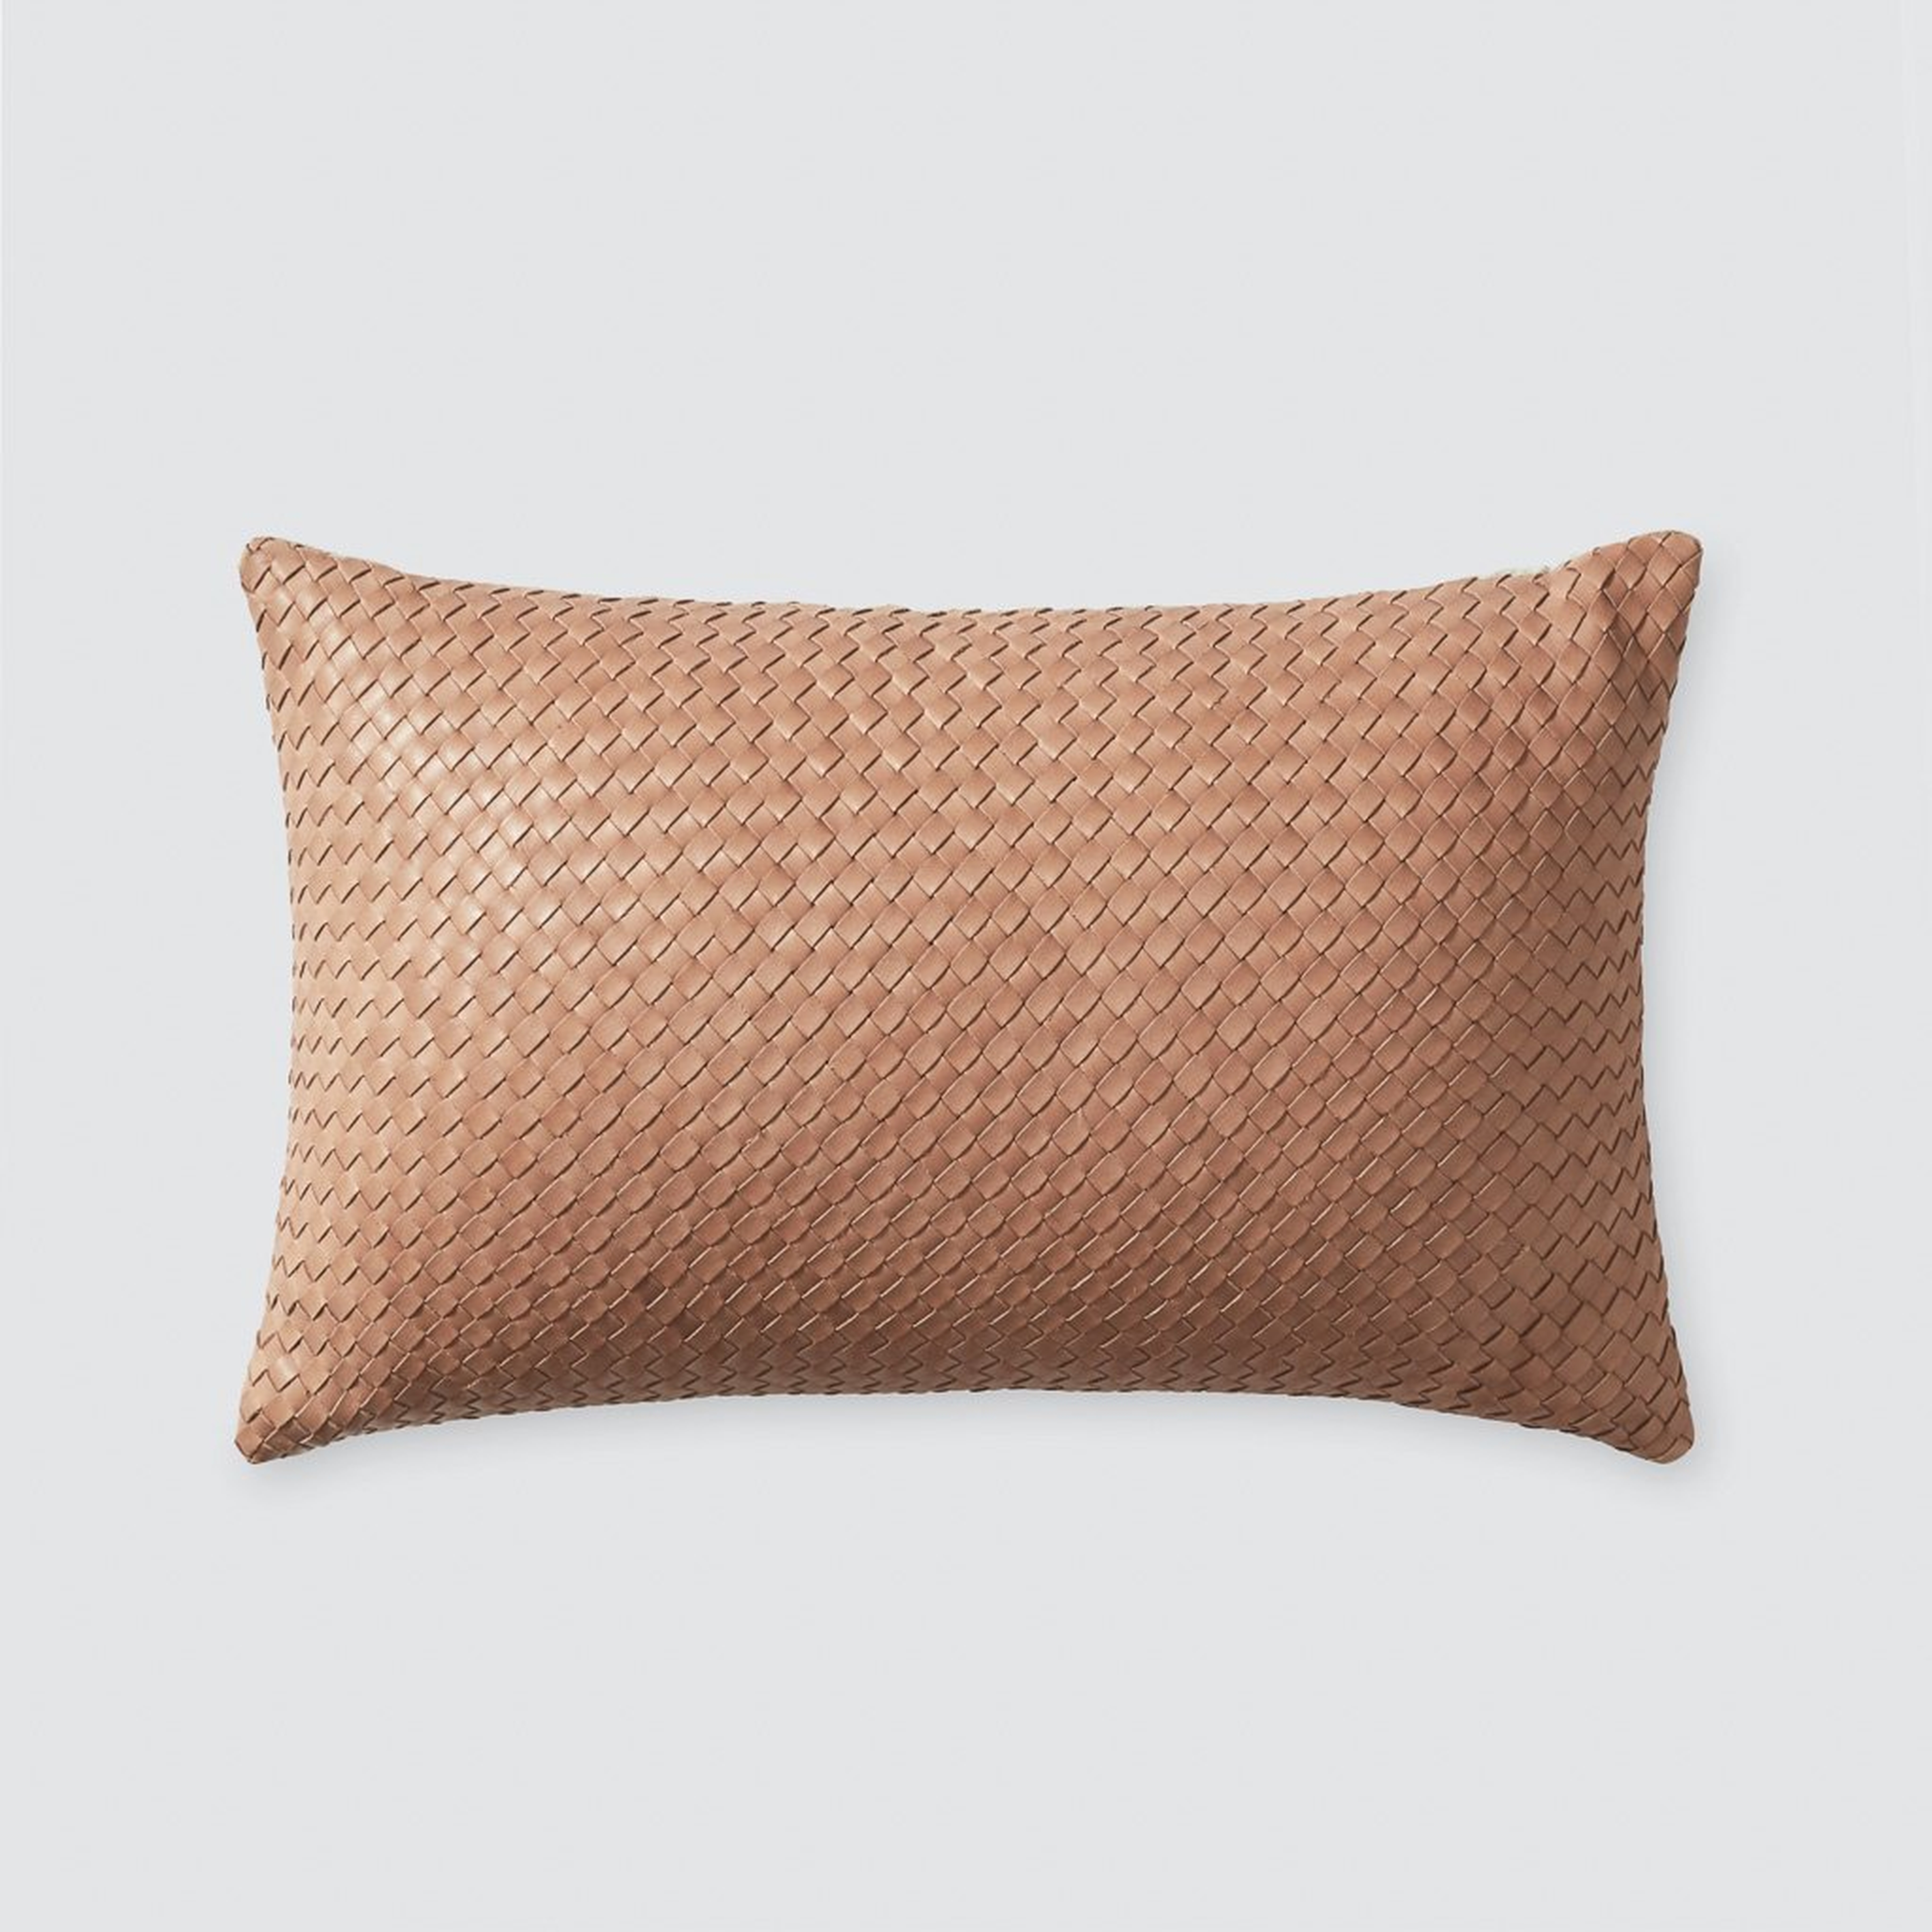 DHARA LEATHER LUMBAR PILLOW - SMALL - The Citizenry